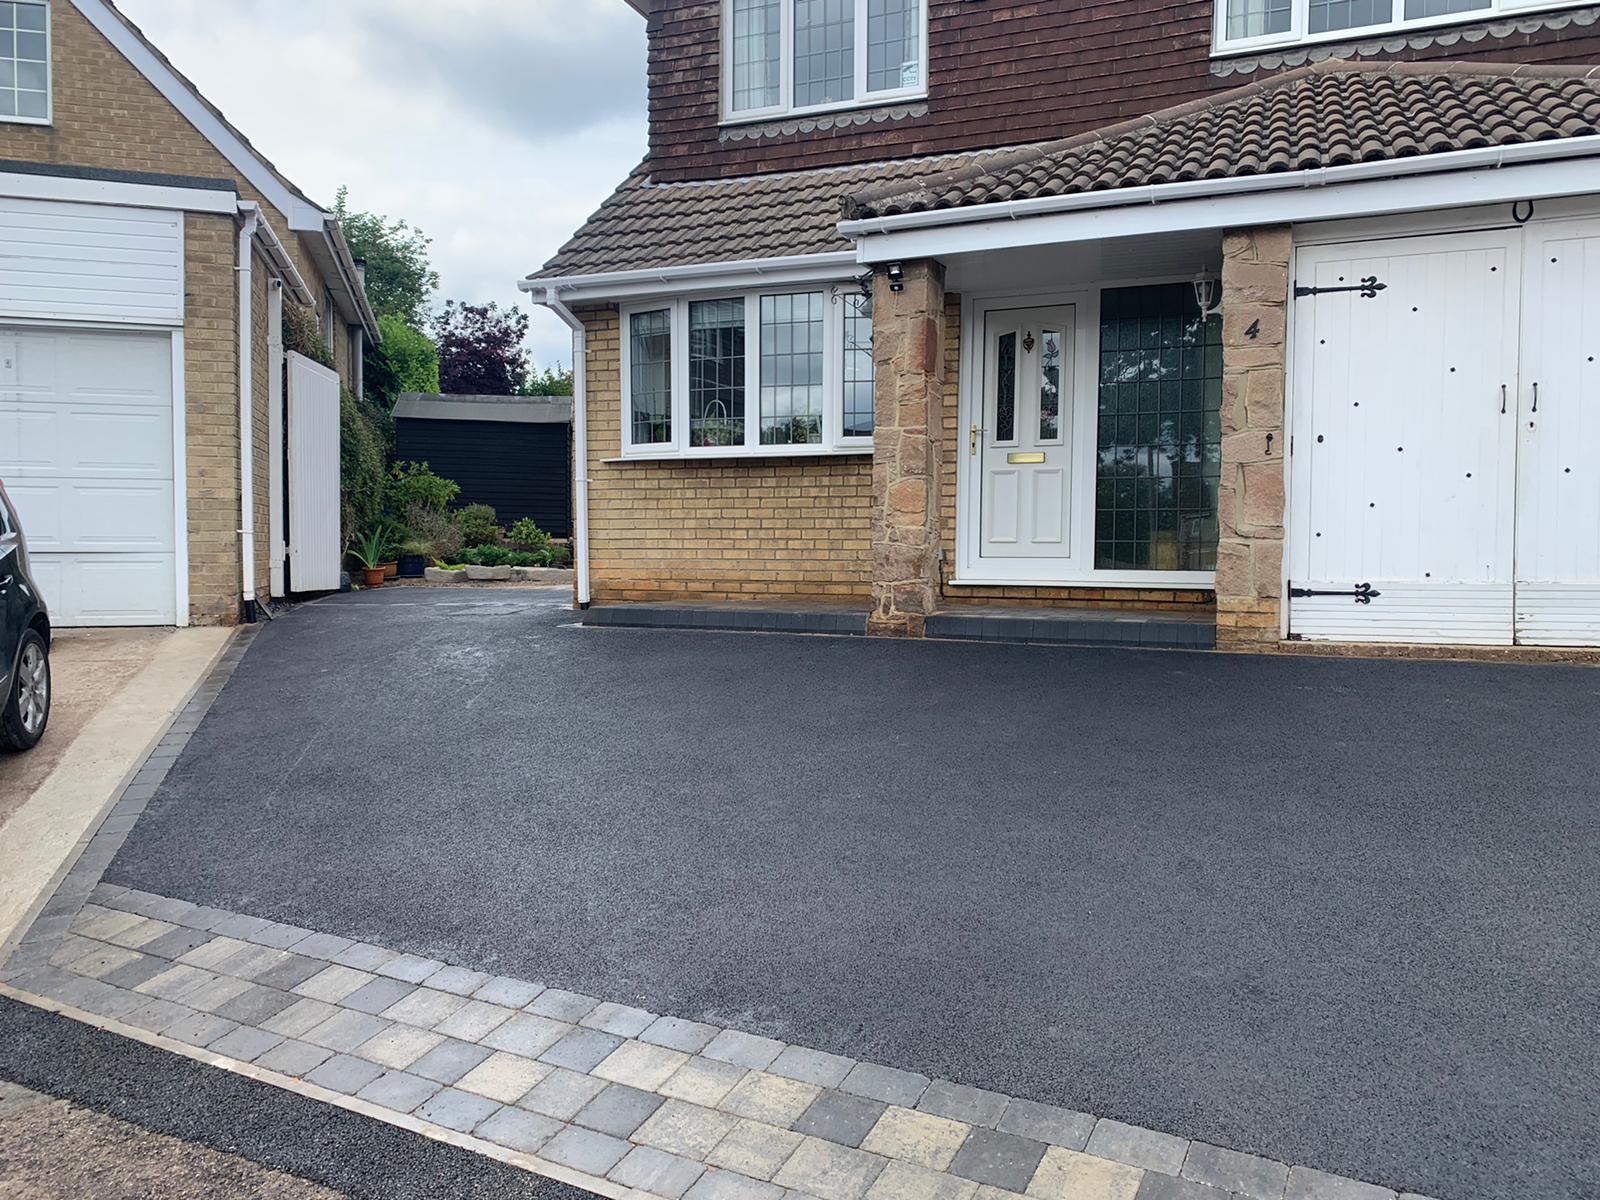 Tarmac Driveways in Frome with block paving border